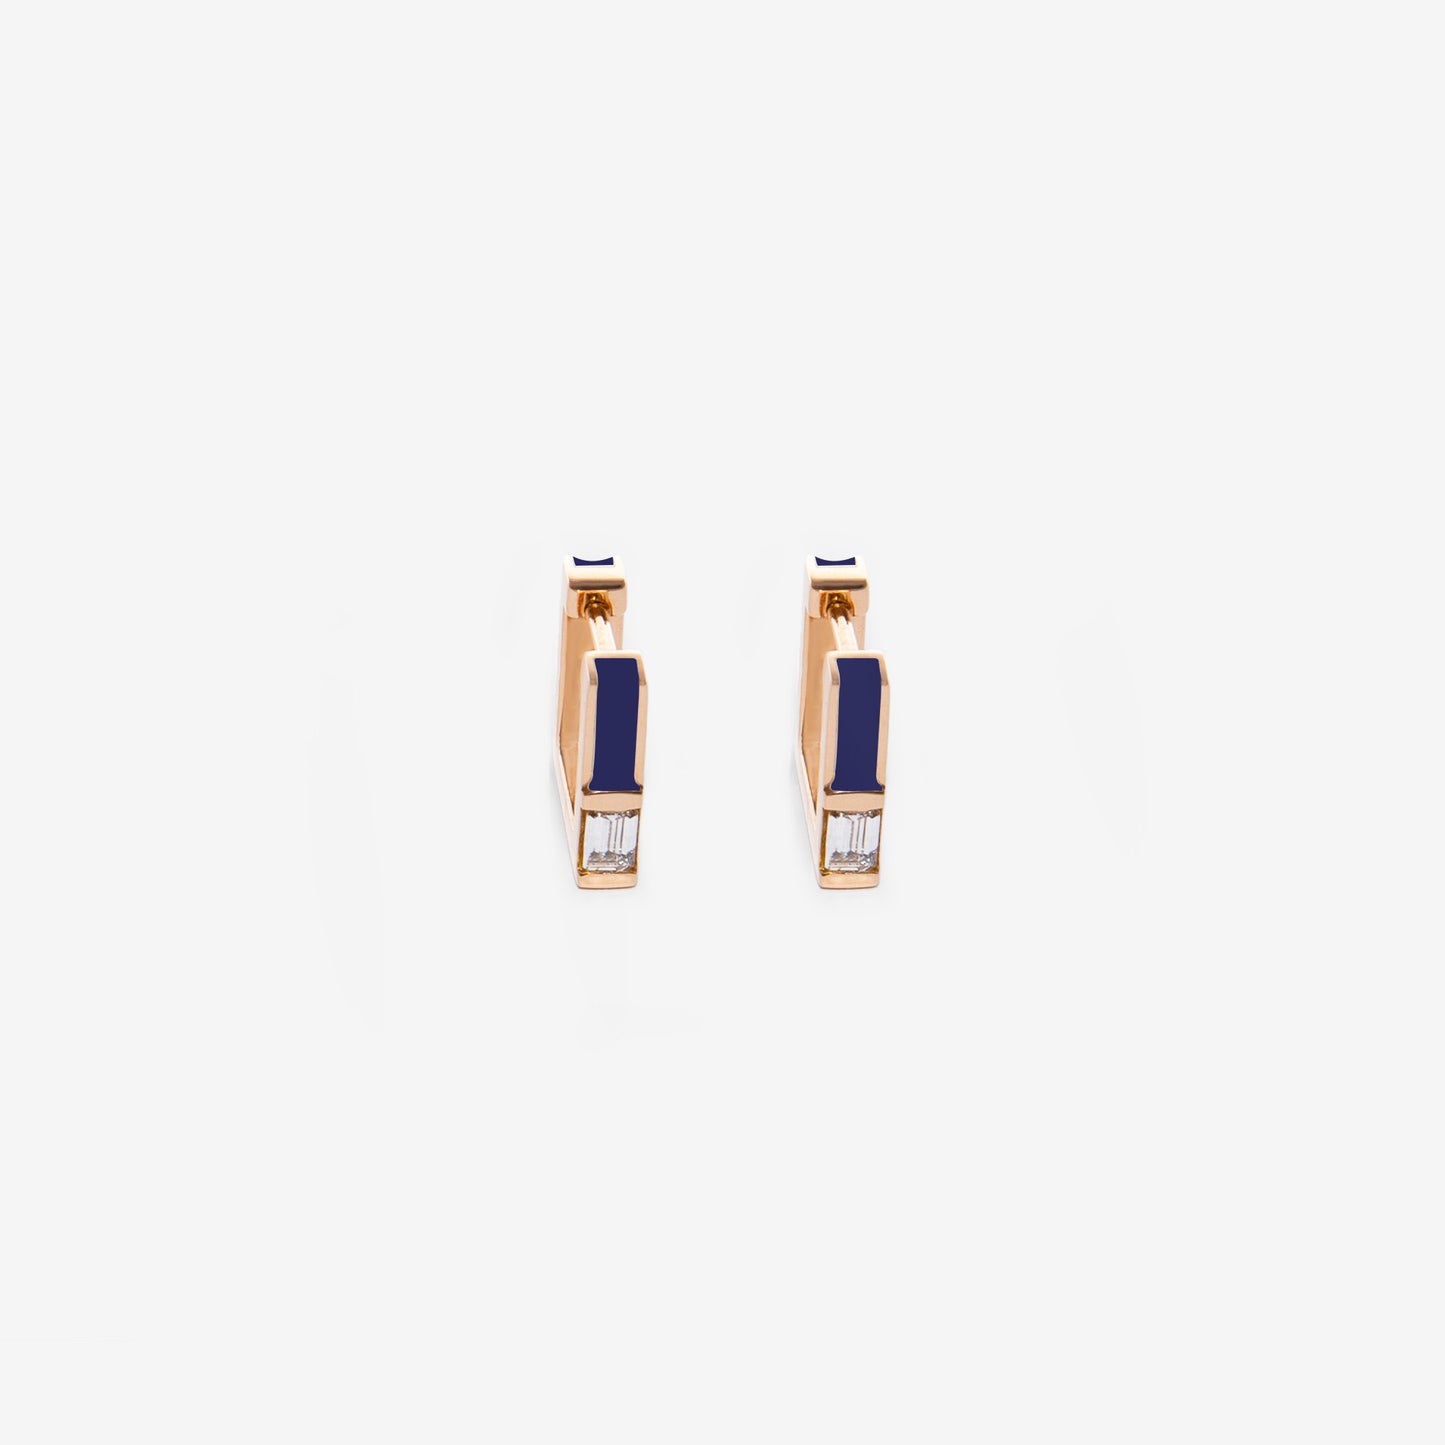 Square blue earrings with diamonds